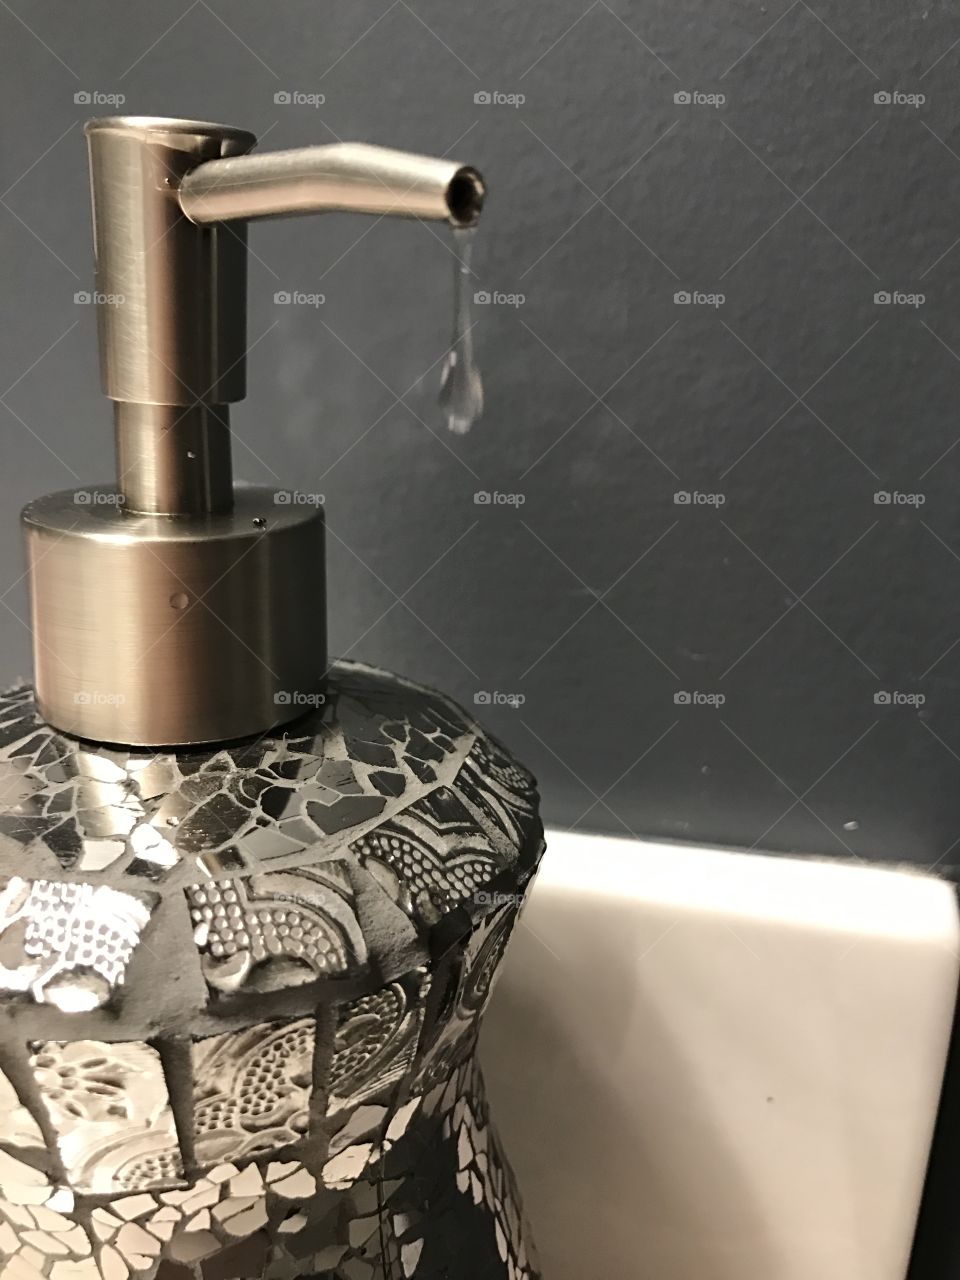 Soap falling out of the dispenser